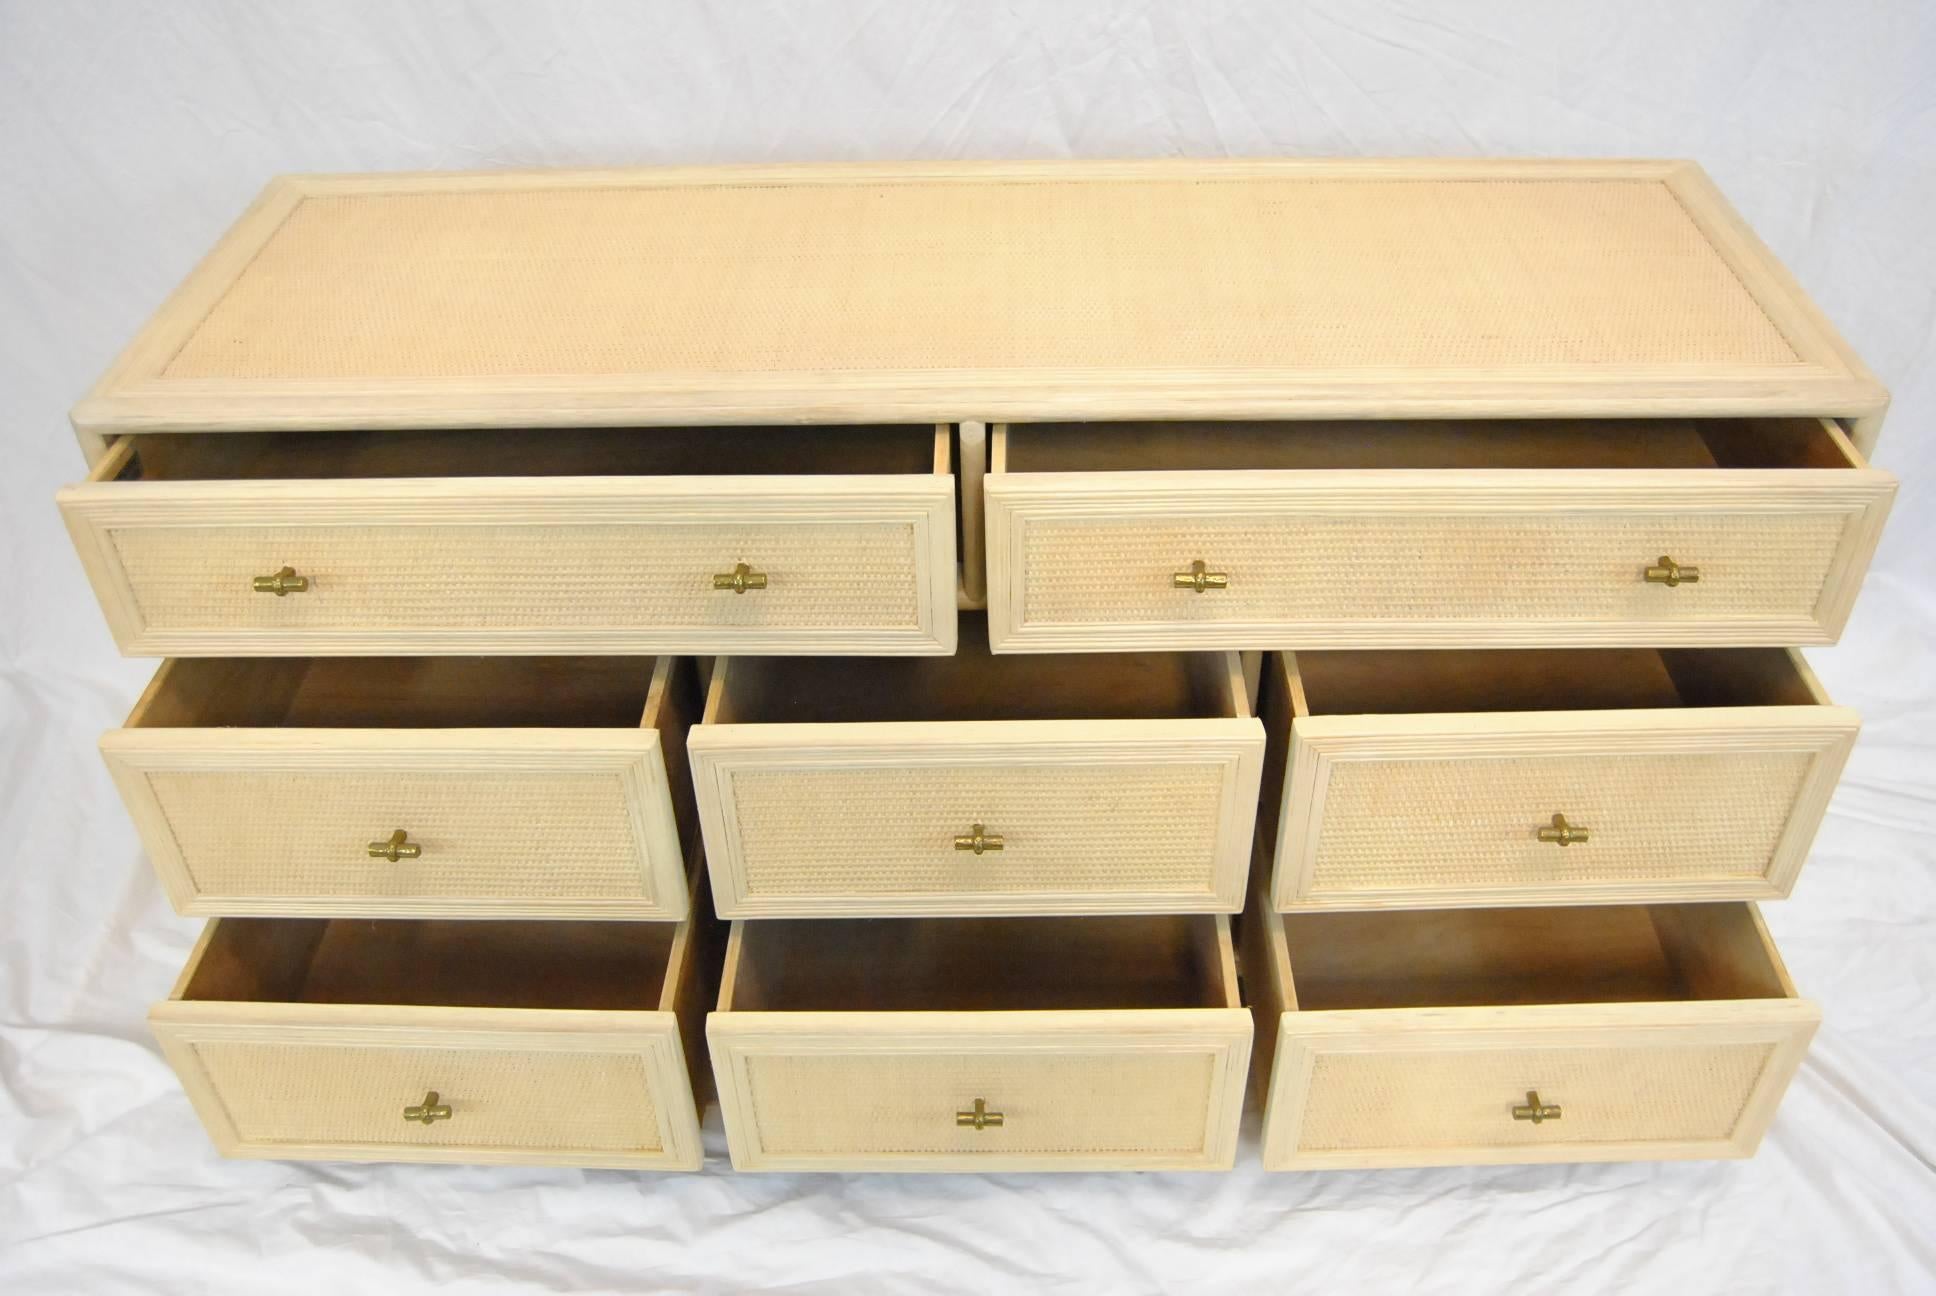 Ficks Reed long chest in cream whitewashed wood with caning panels on the eight drawer fronts, sides and top. Drawers have brass hardware, circa 1970s. Very nice pre owned condition.